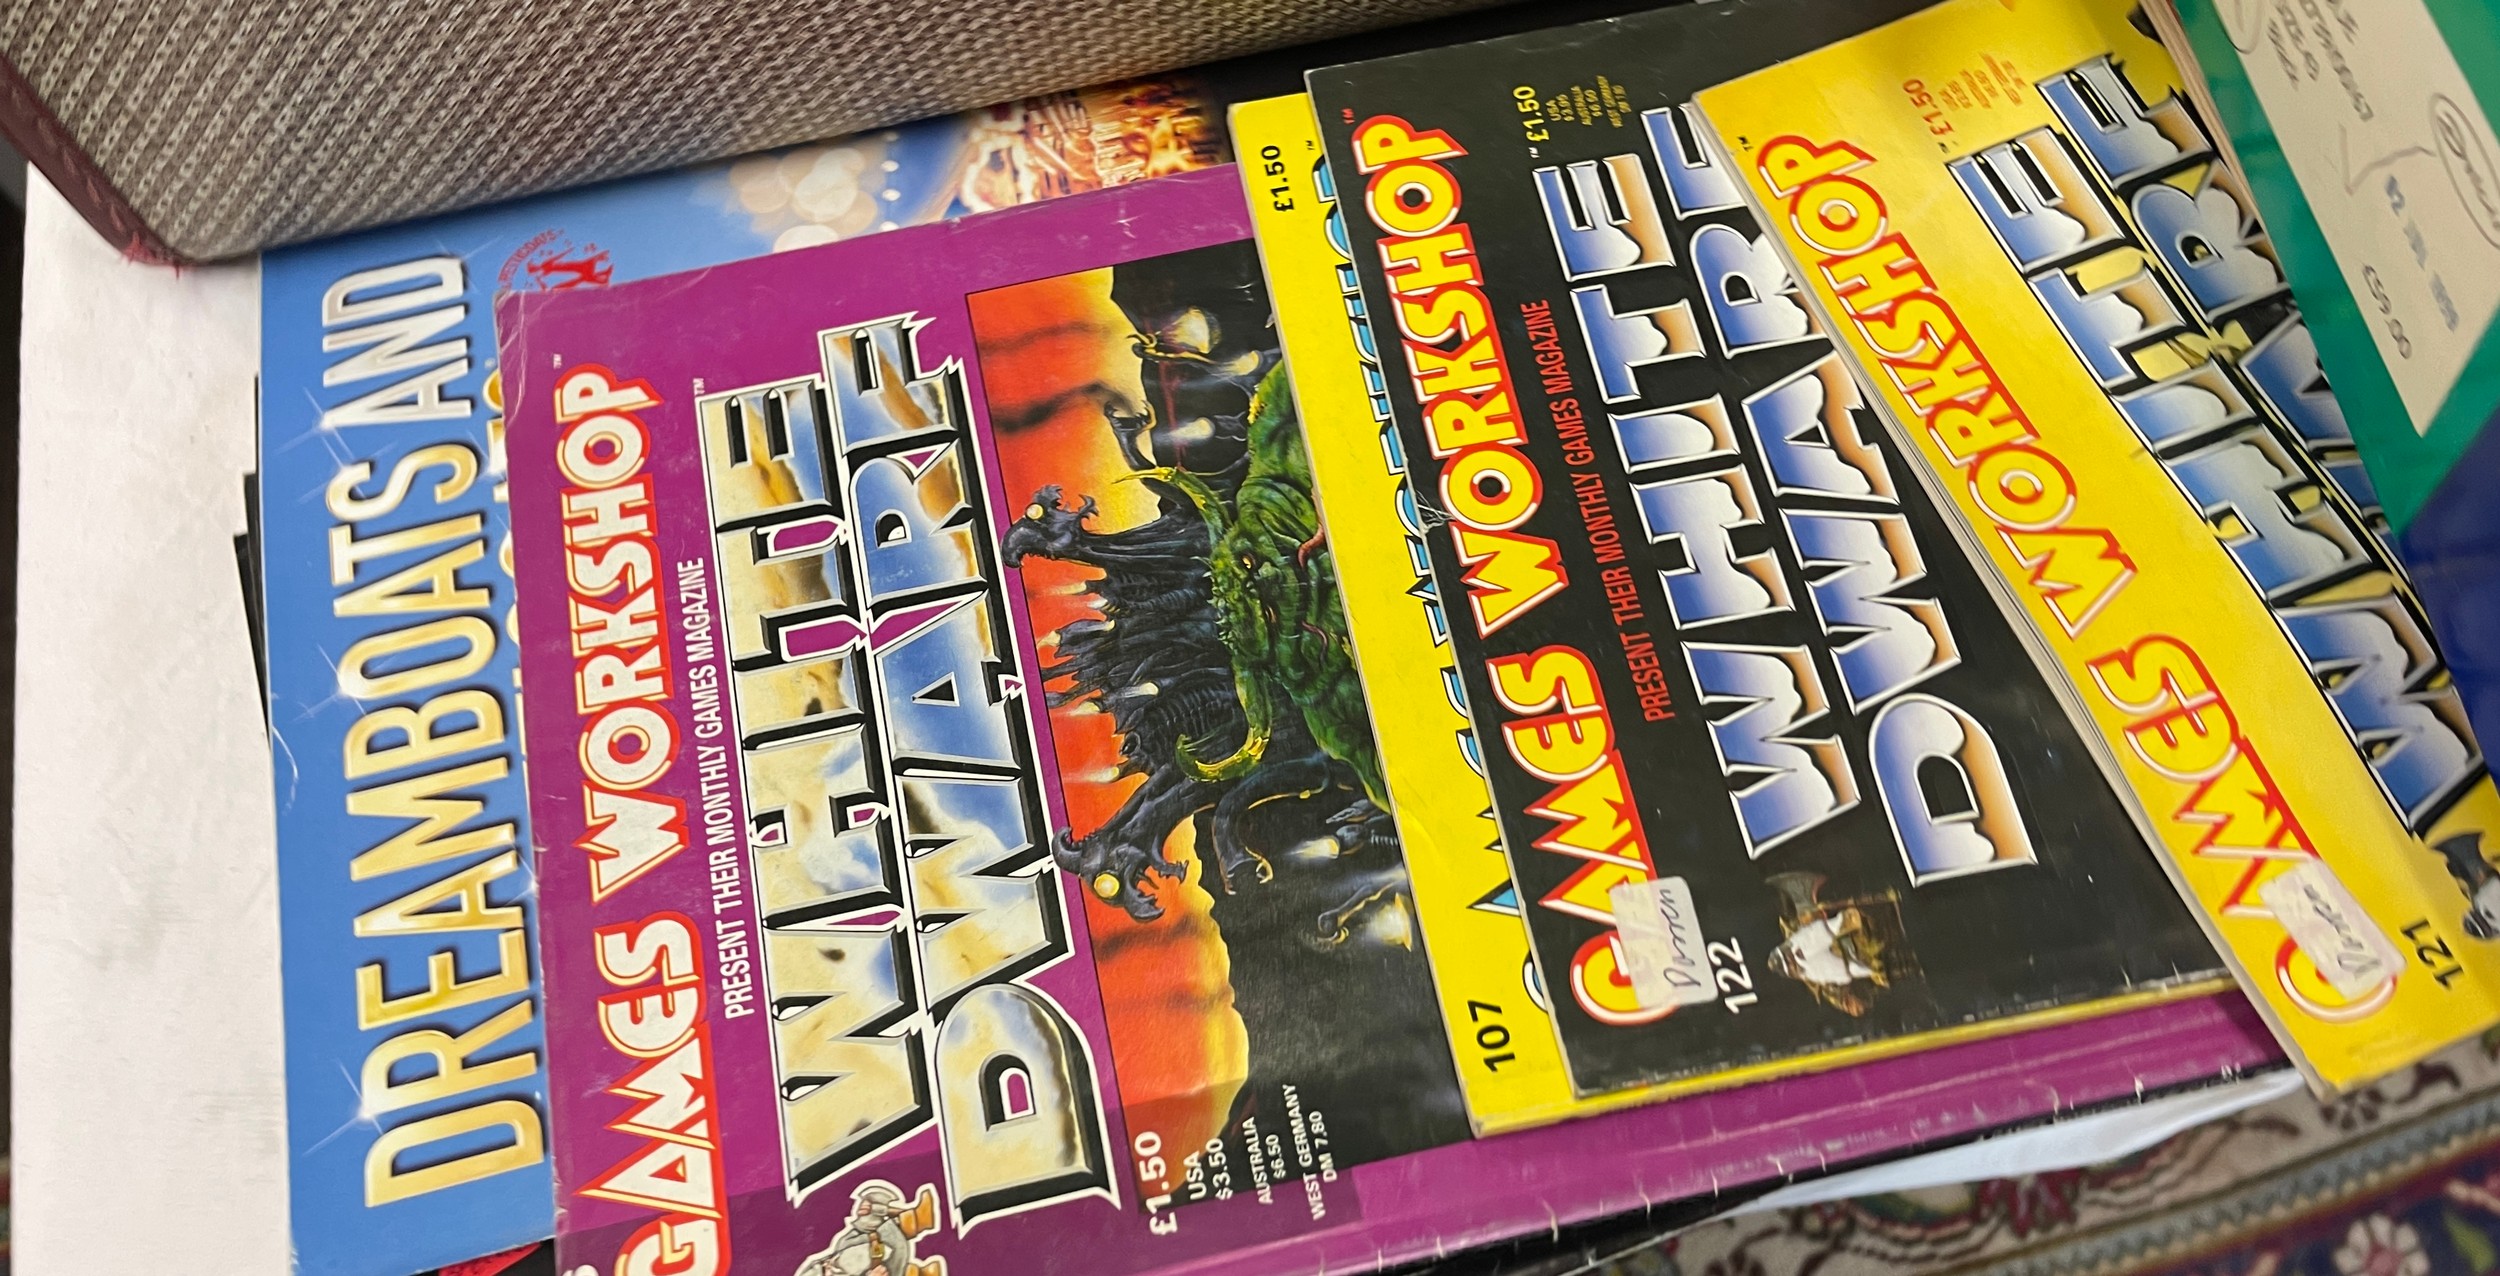 Vintage suitcase containing vintage computer games, magazines including White Dwarf, Work games - Image 3 of 5